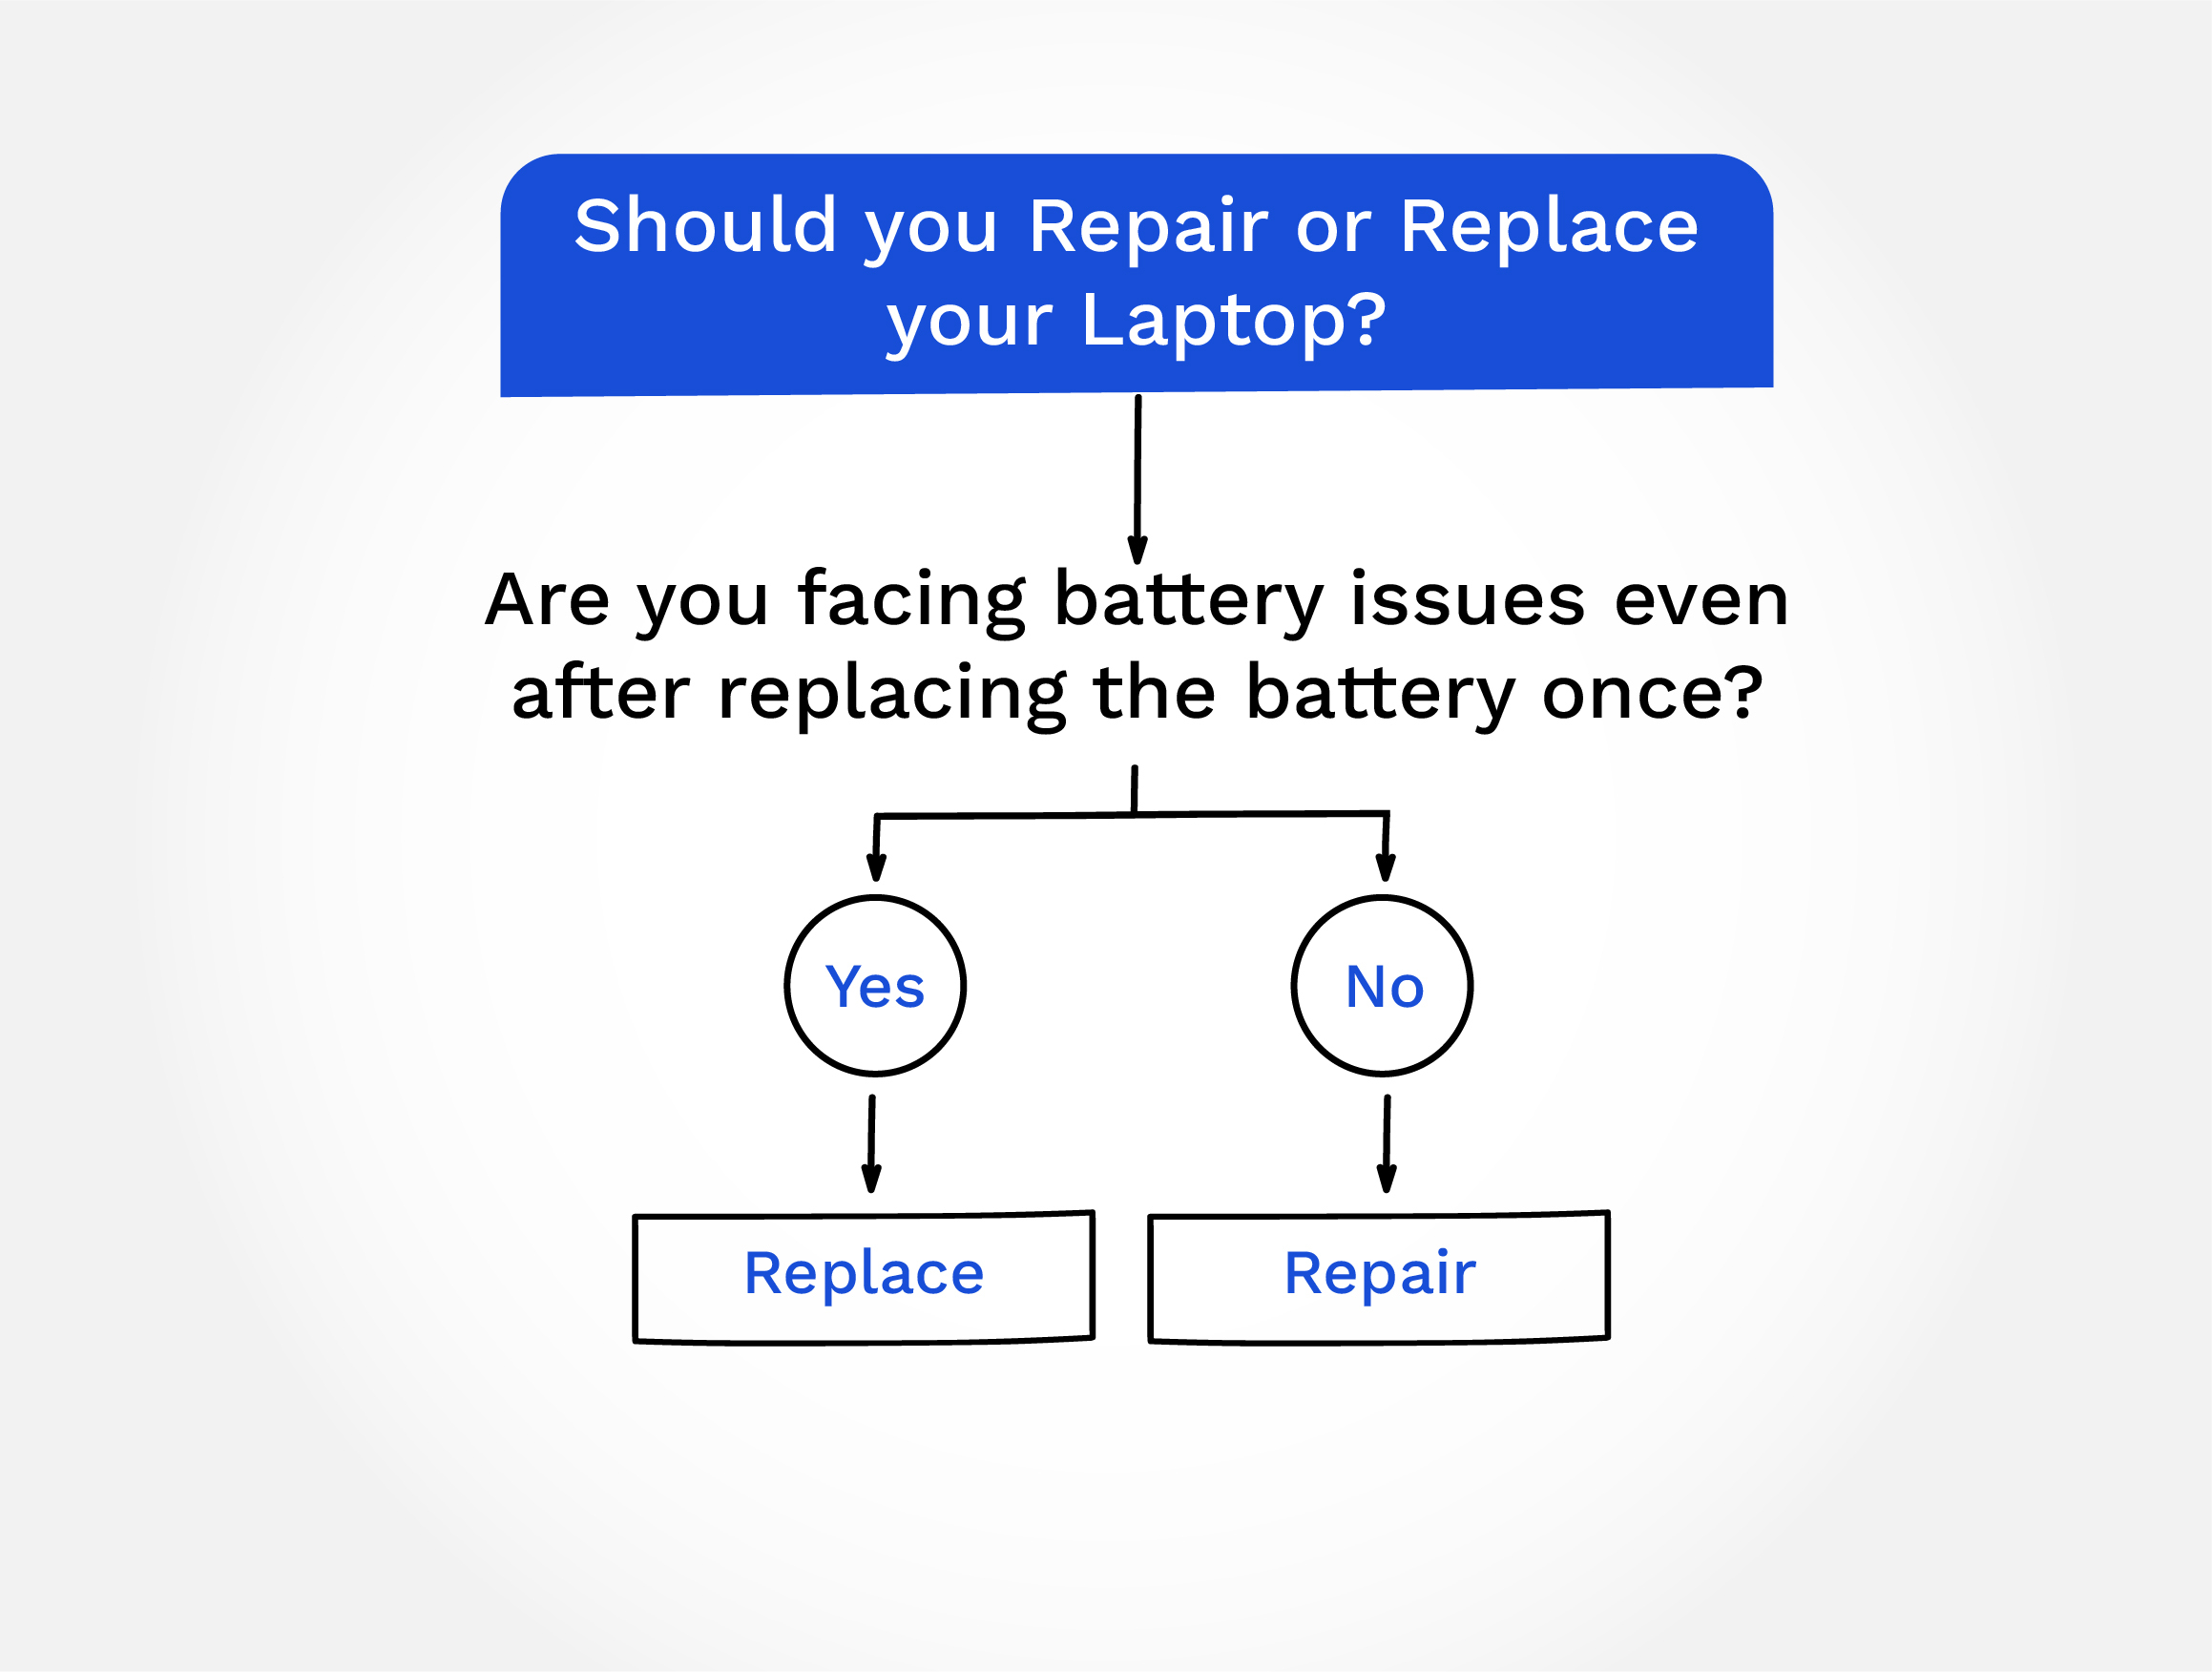 Are You Facing Battery Issues Even After Replacing The Battery Once?